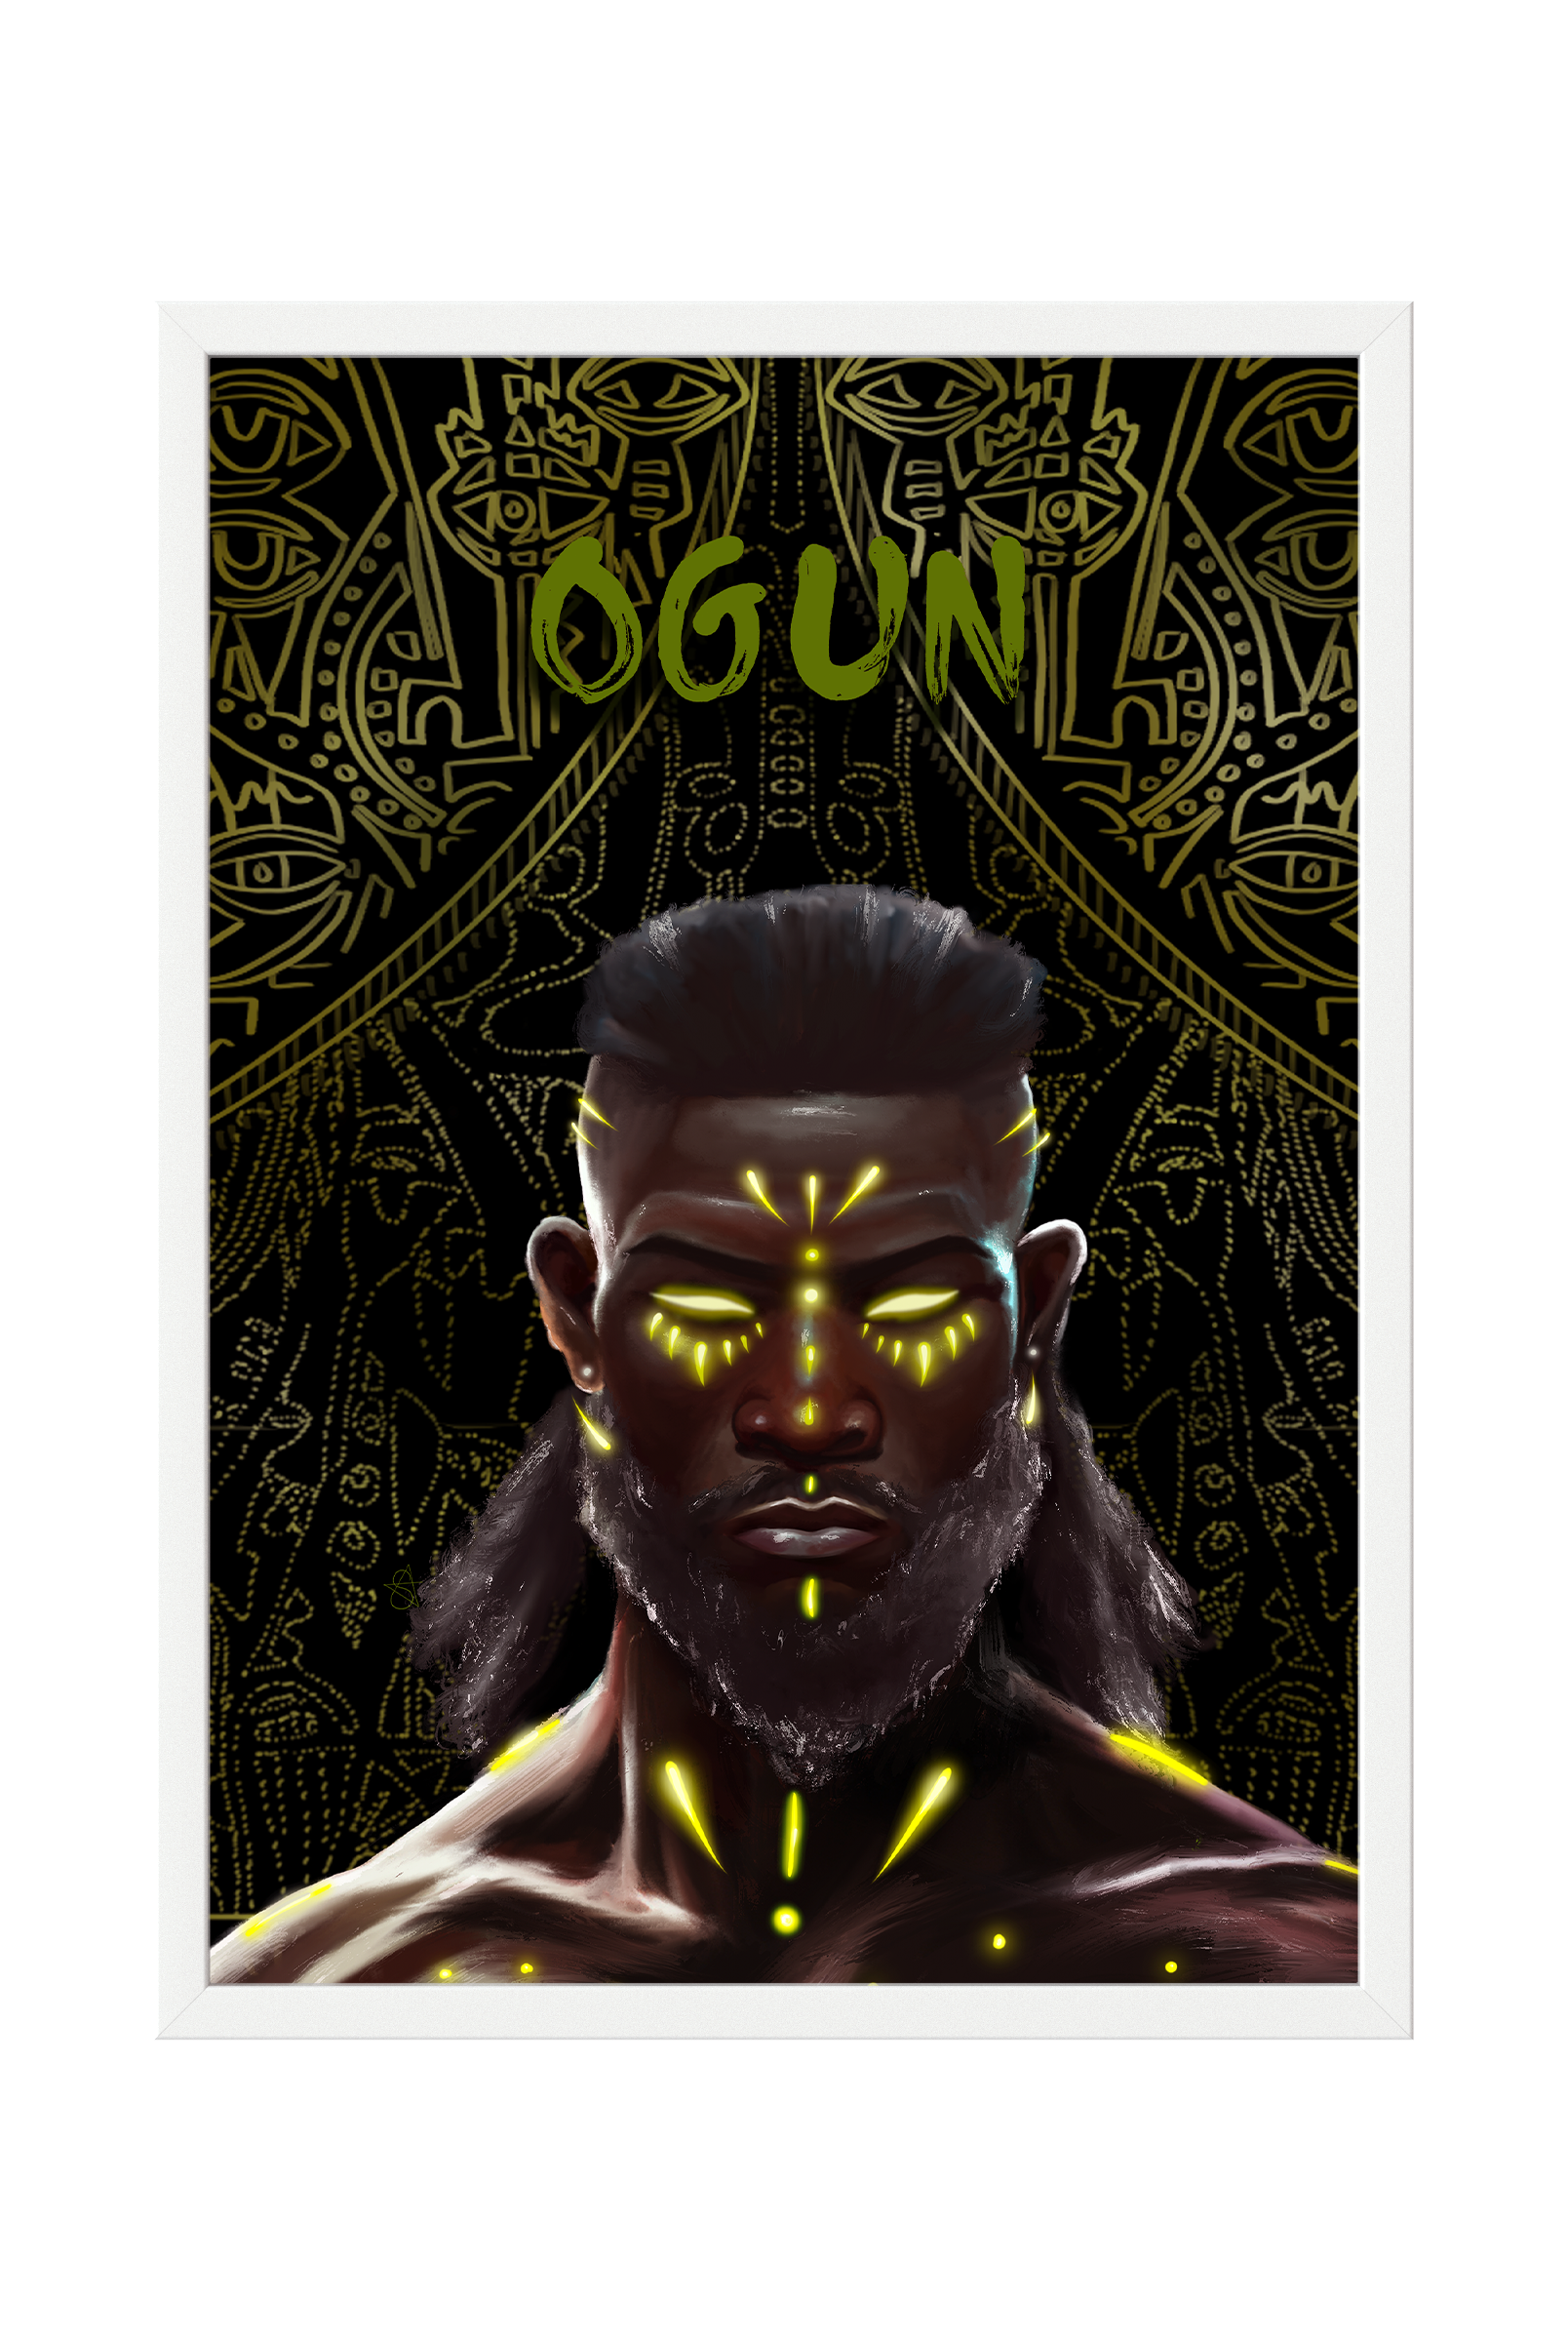 Ogun Holographic Art Print on high-quality matte or velvet paper, framed in gallery black, white, or natural maple, depicting Yoruba Orisa of war and iron.